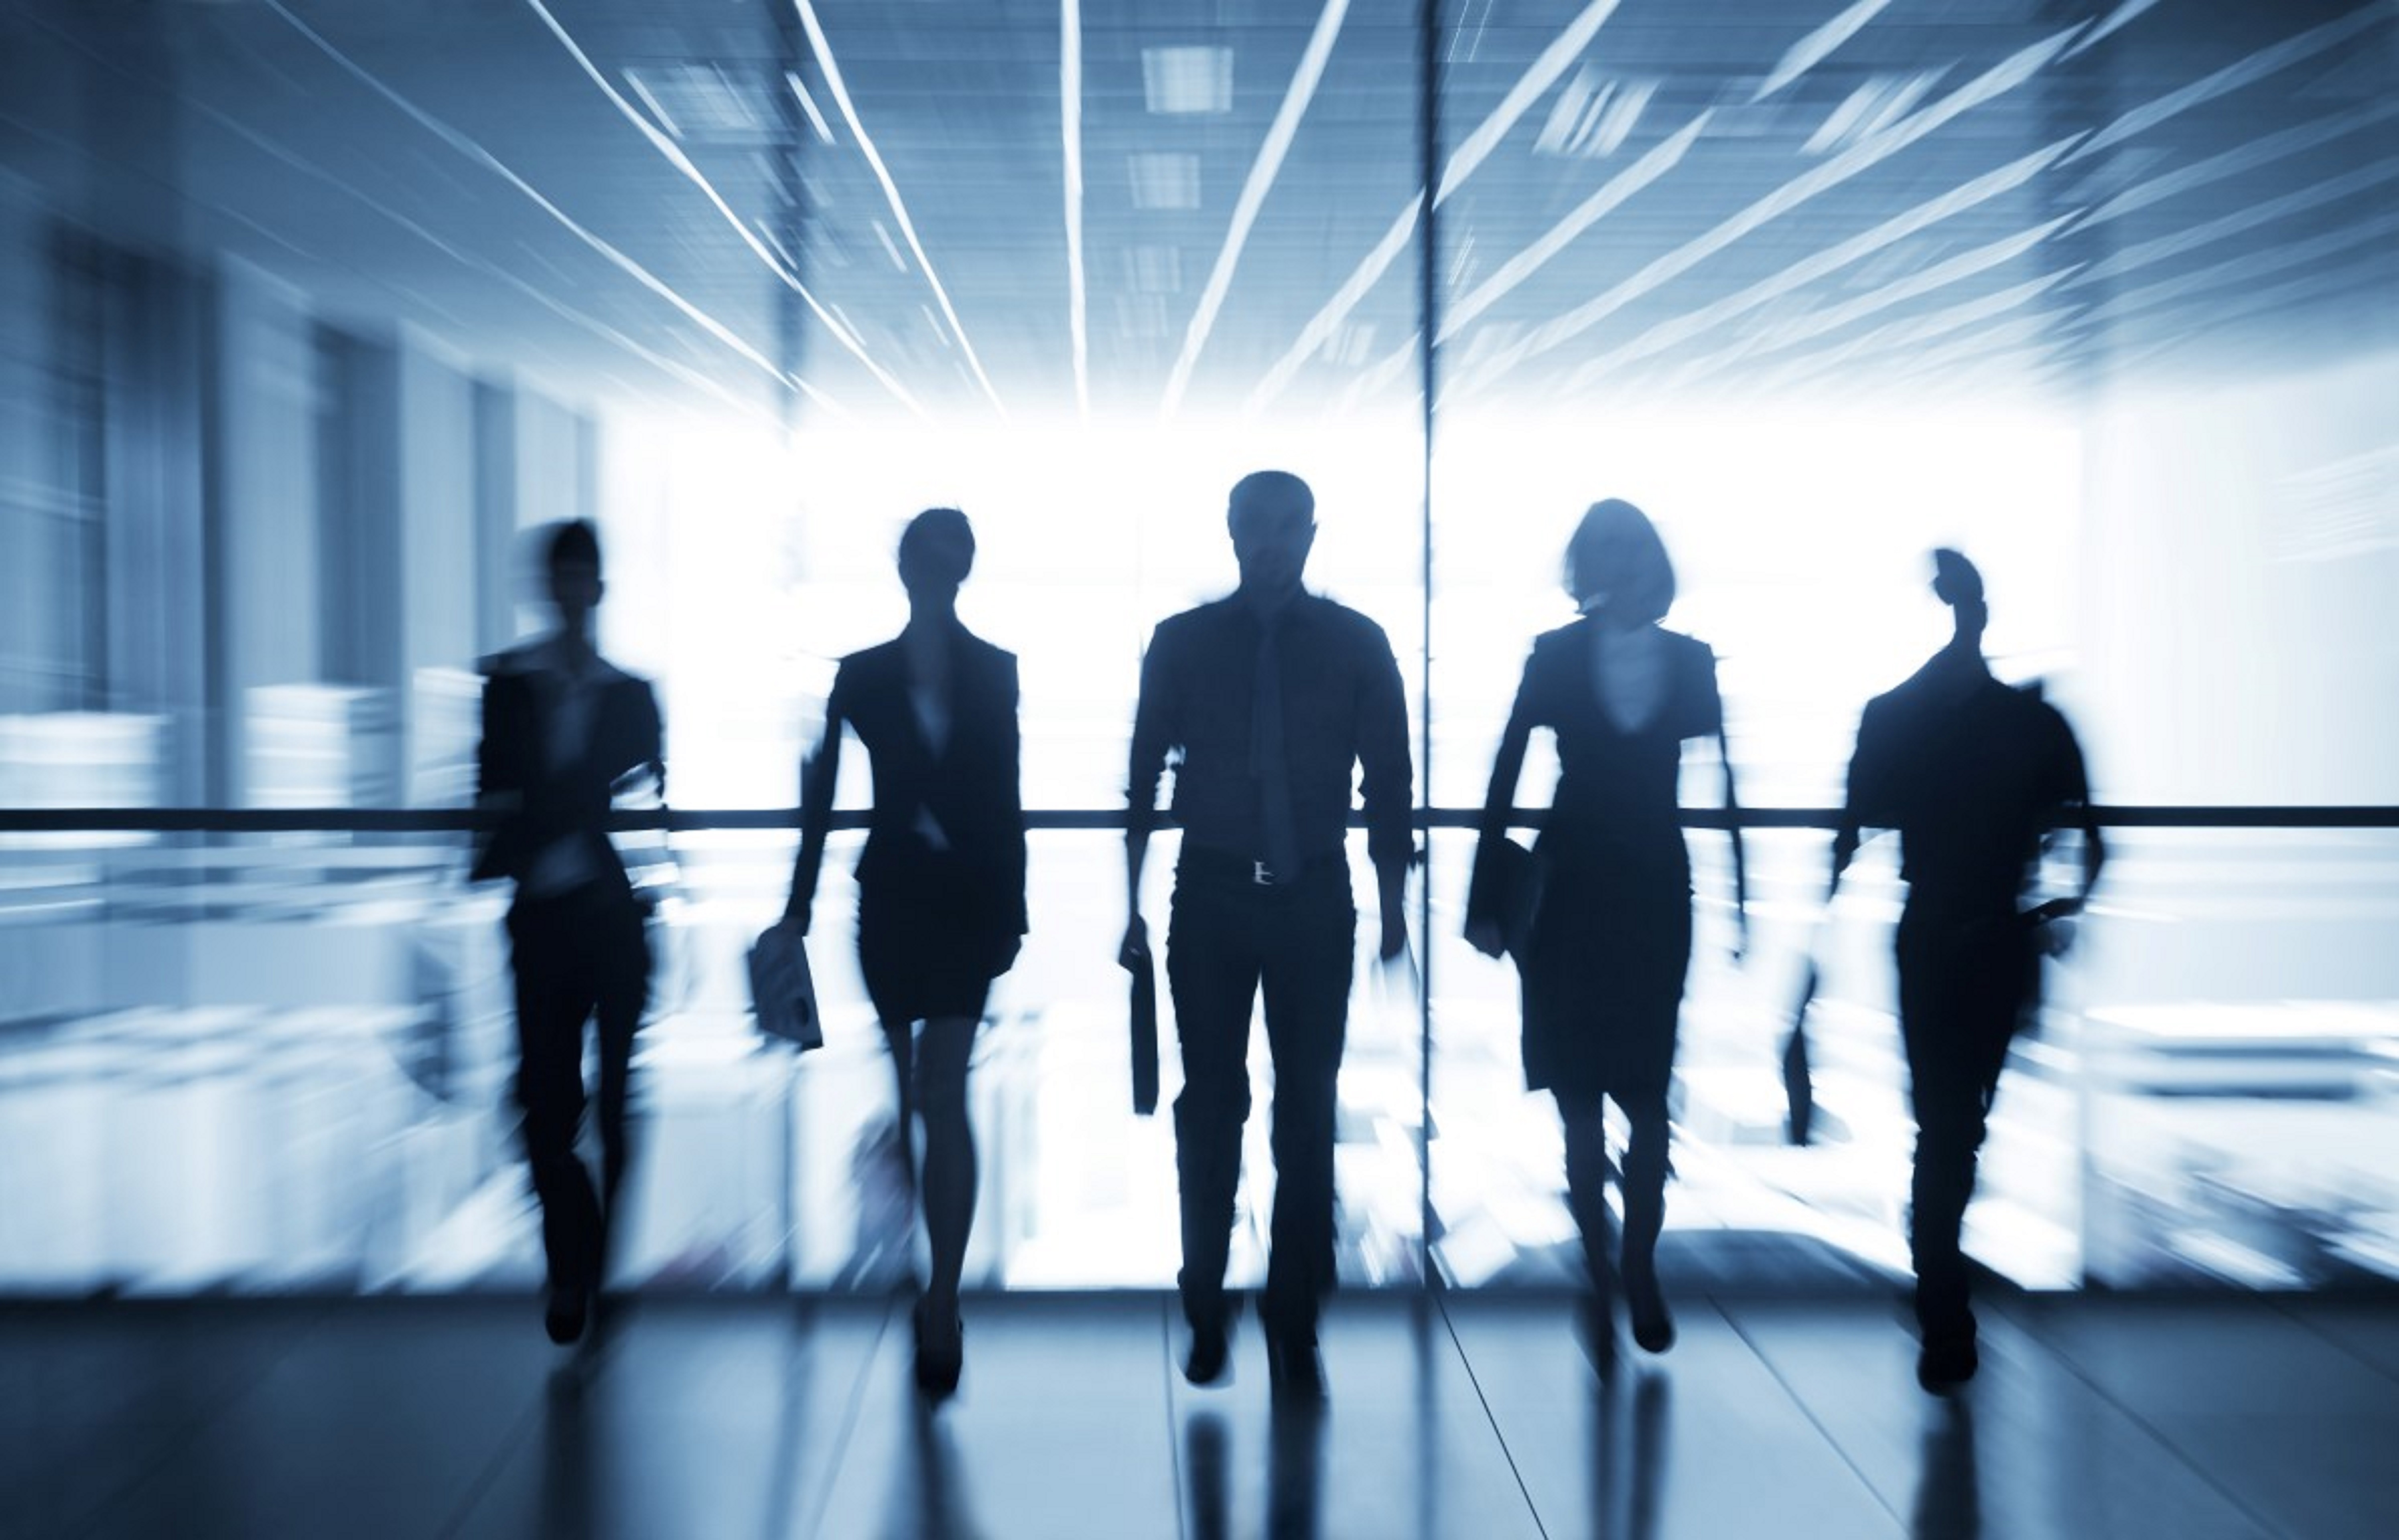 Several silhouettes of businesspeople interacting office background